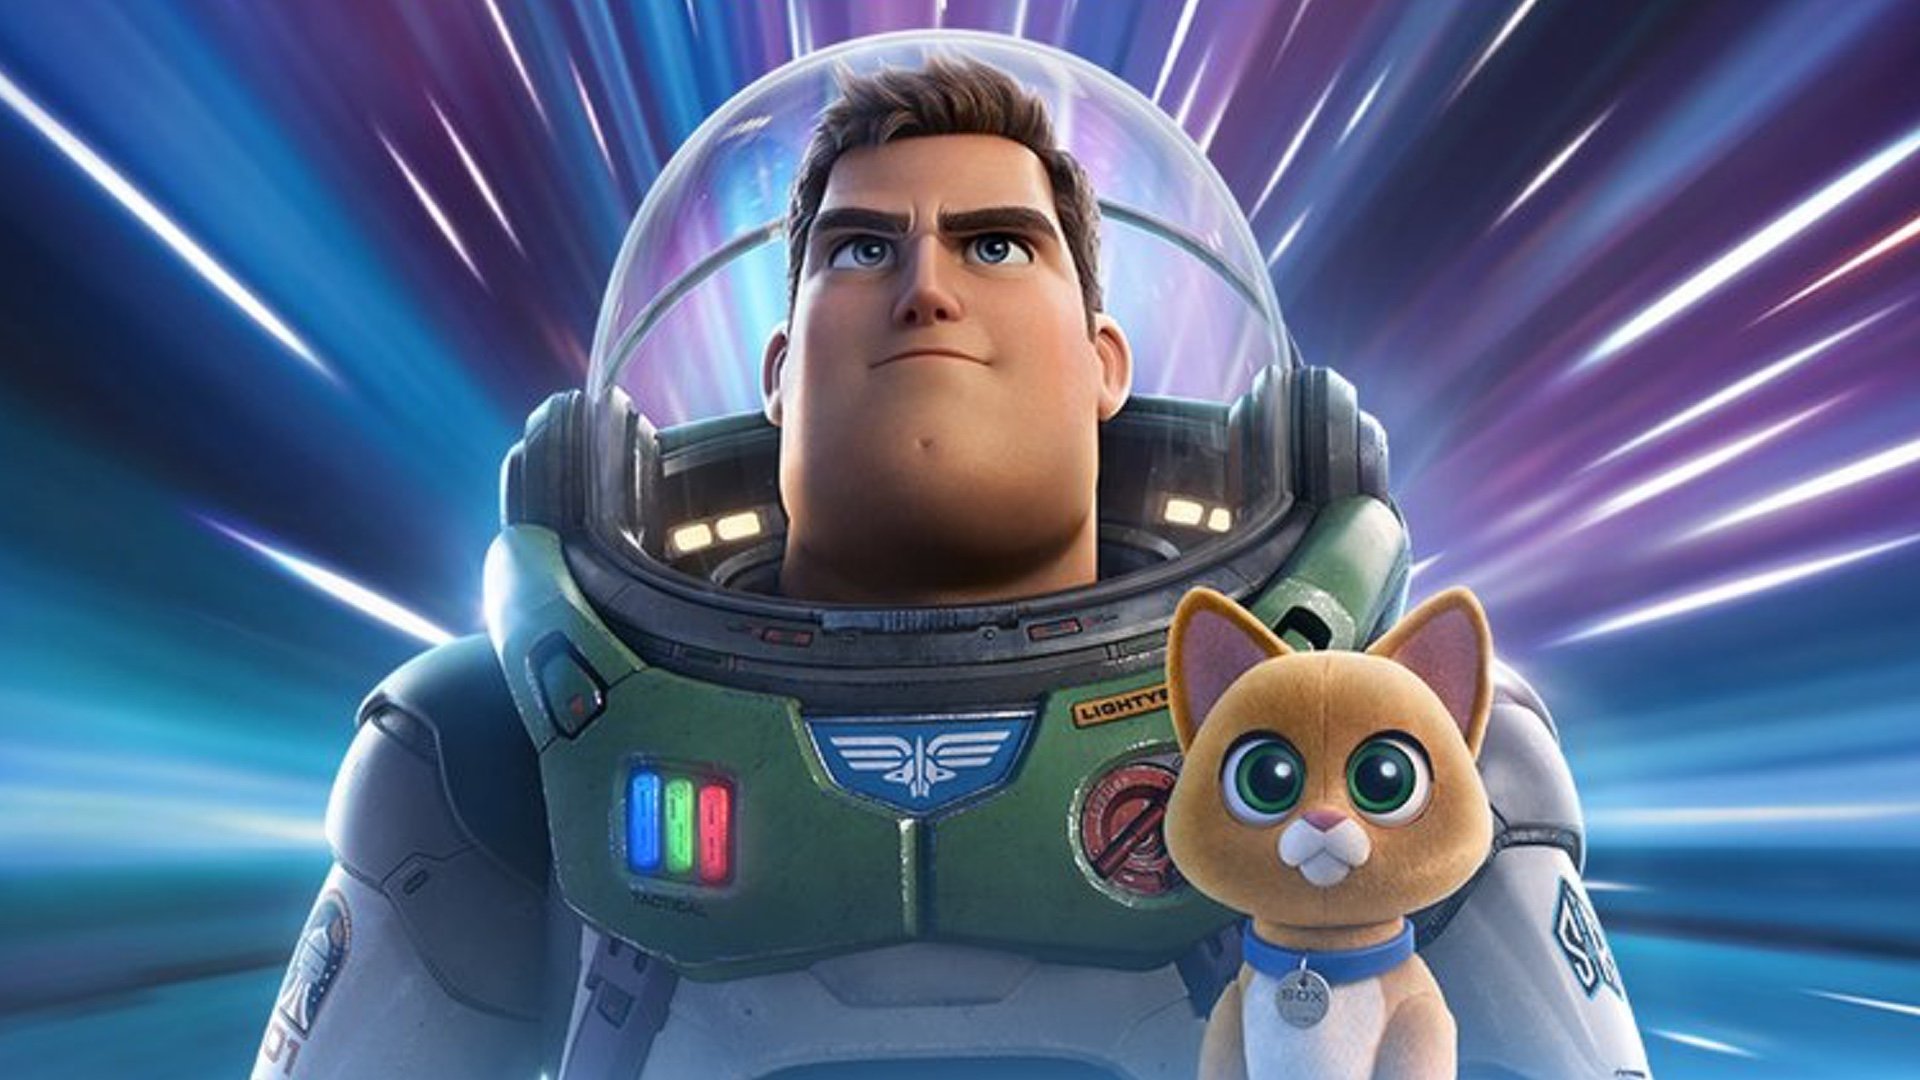 movie review of lightyear